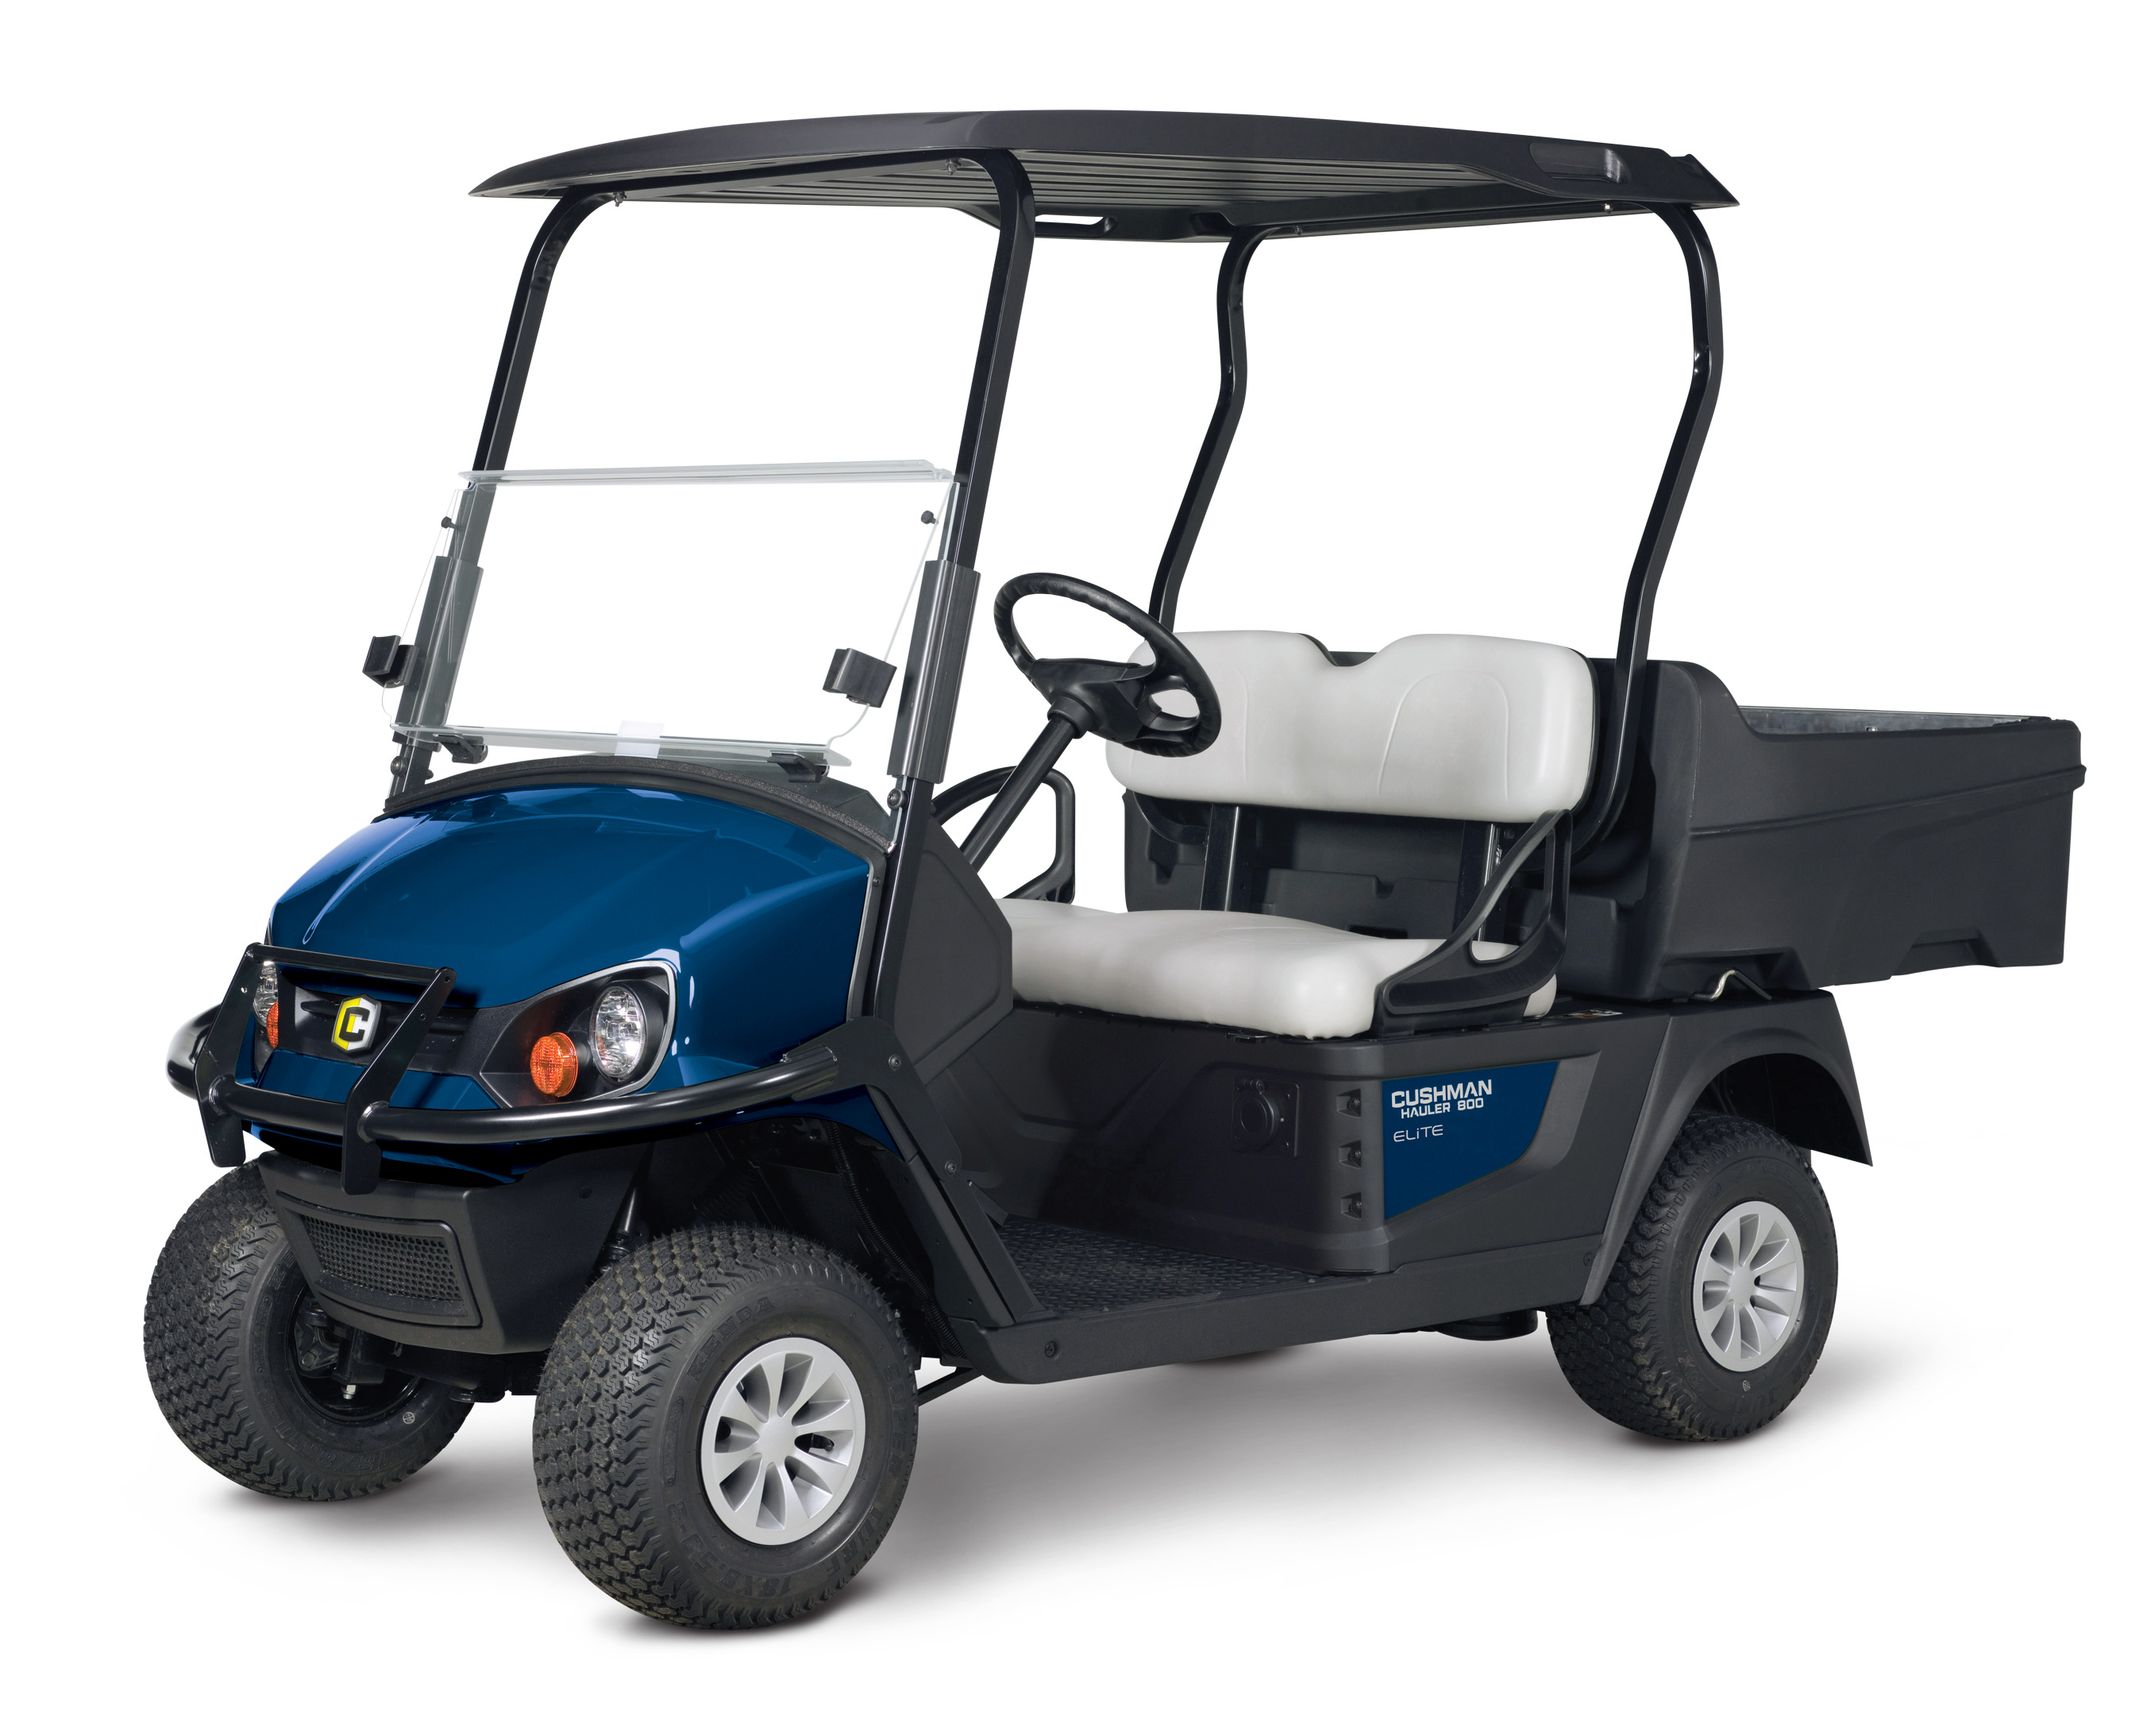 Sasser Golf Cars, Inc. - New & Used Golf Cars, Service, Parts and Financing  in Goldsboro, NC, near Raleigh, Clayton, Cary, Rocky Mount, and Morehead  City